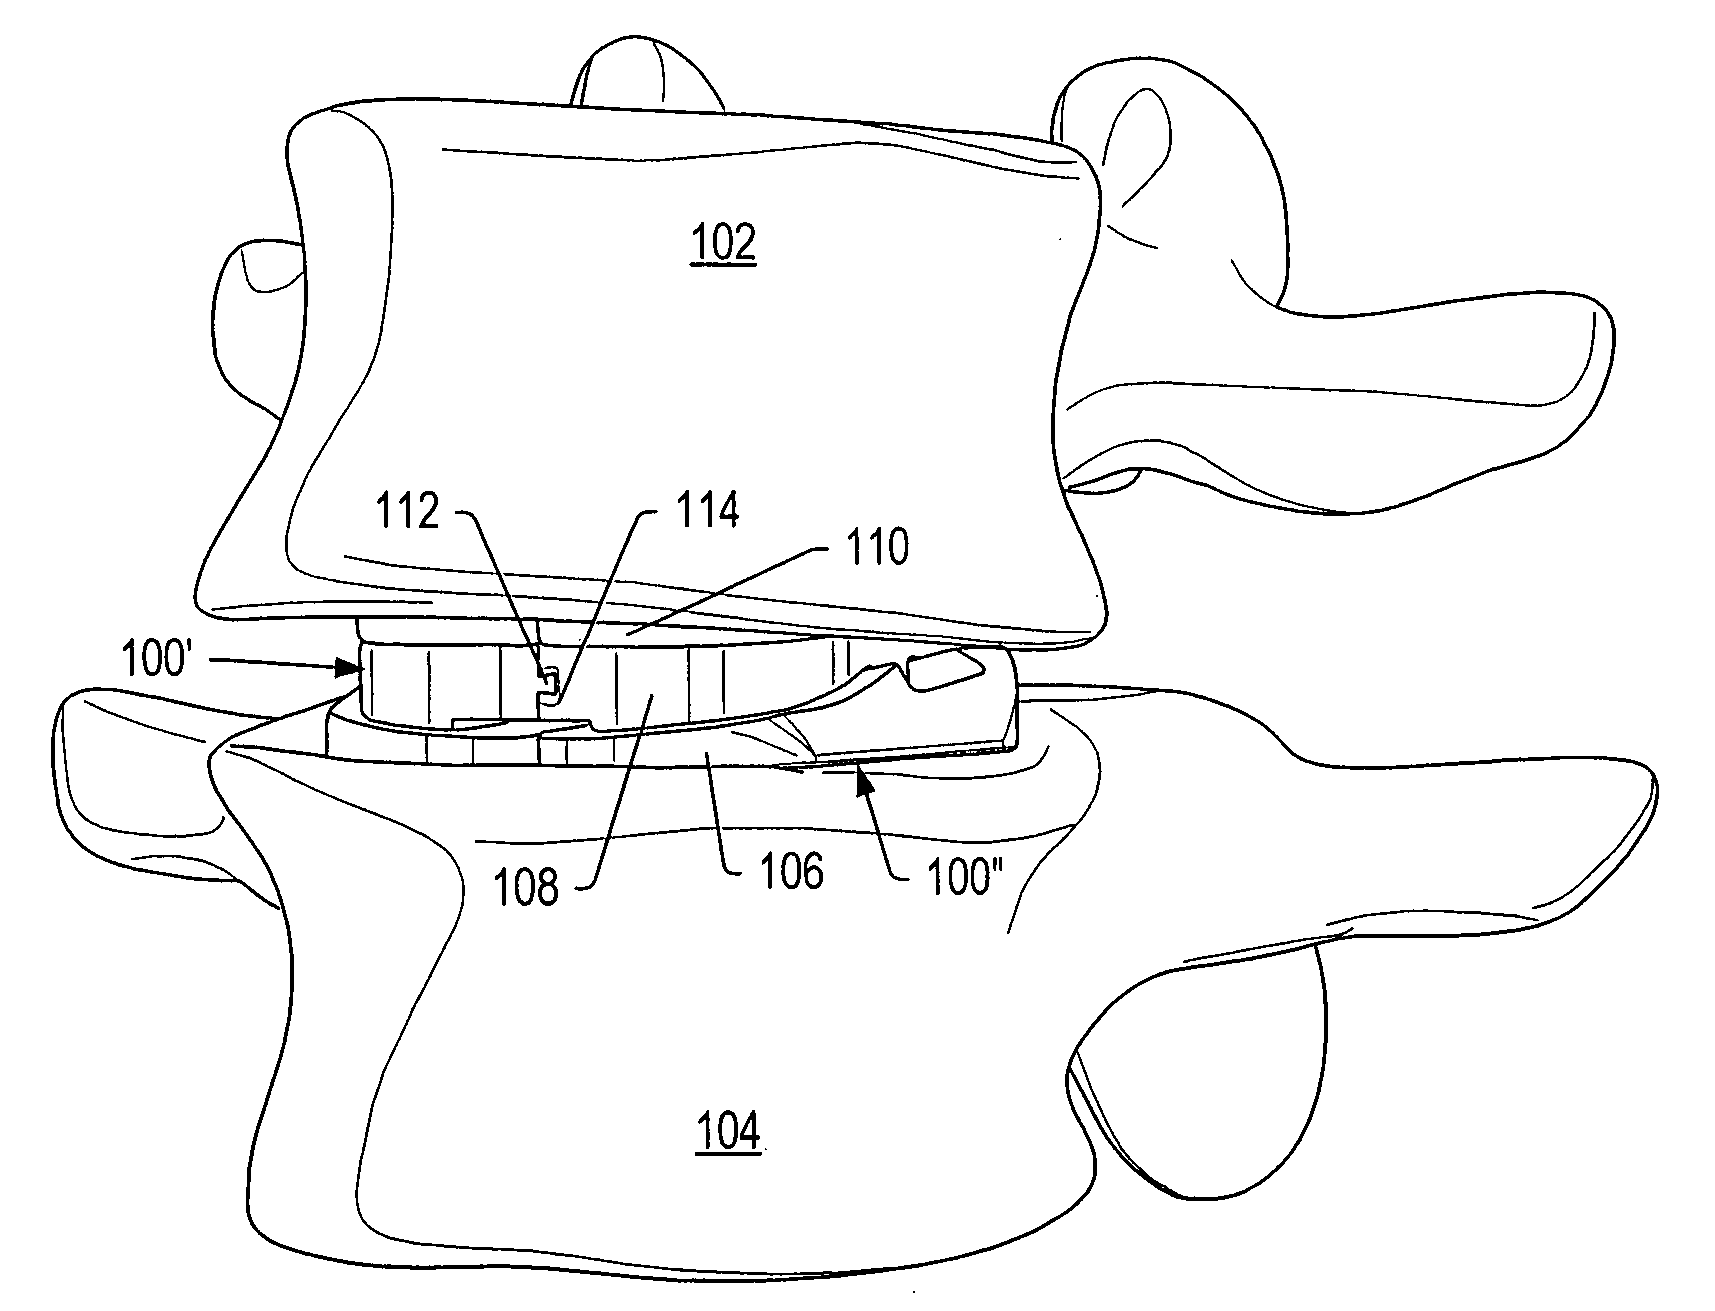 Dampener system for a posterior stabilization system with a variable length elongated member